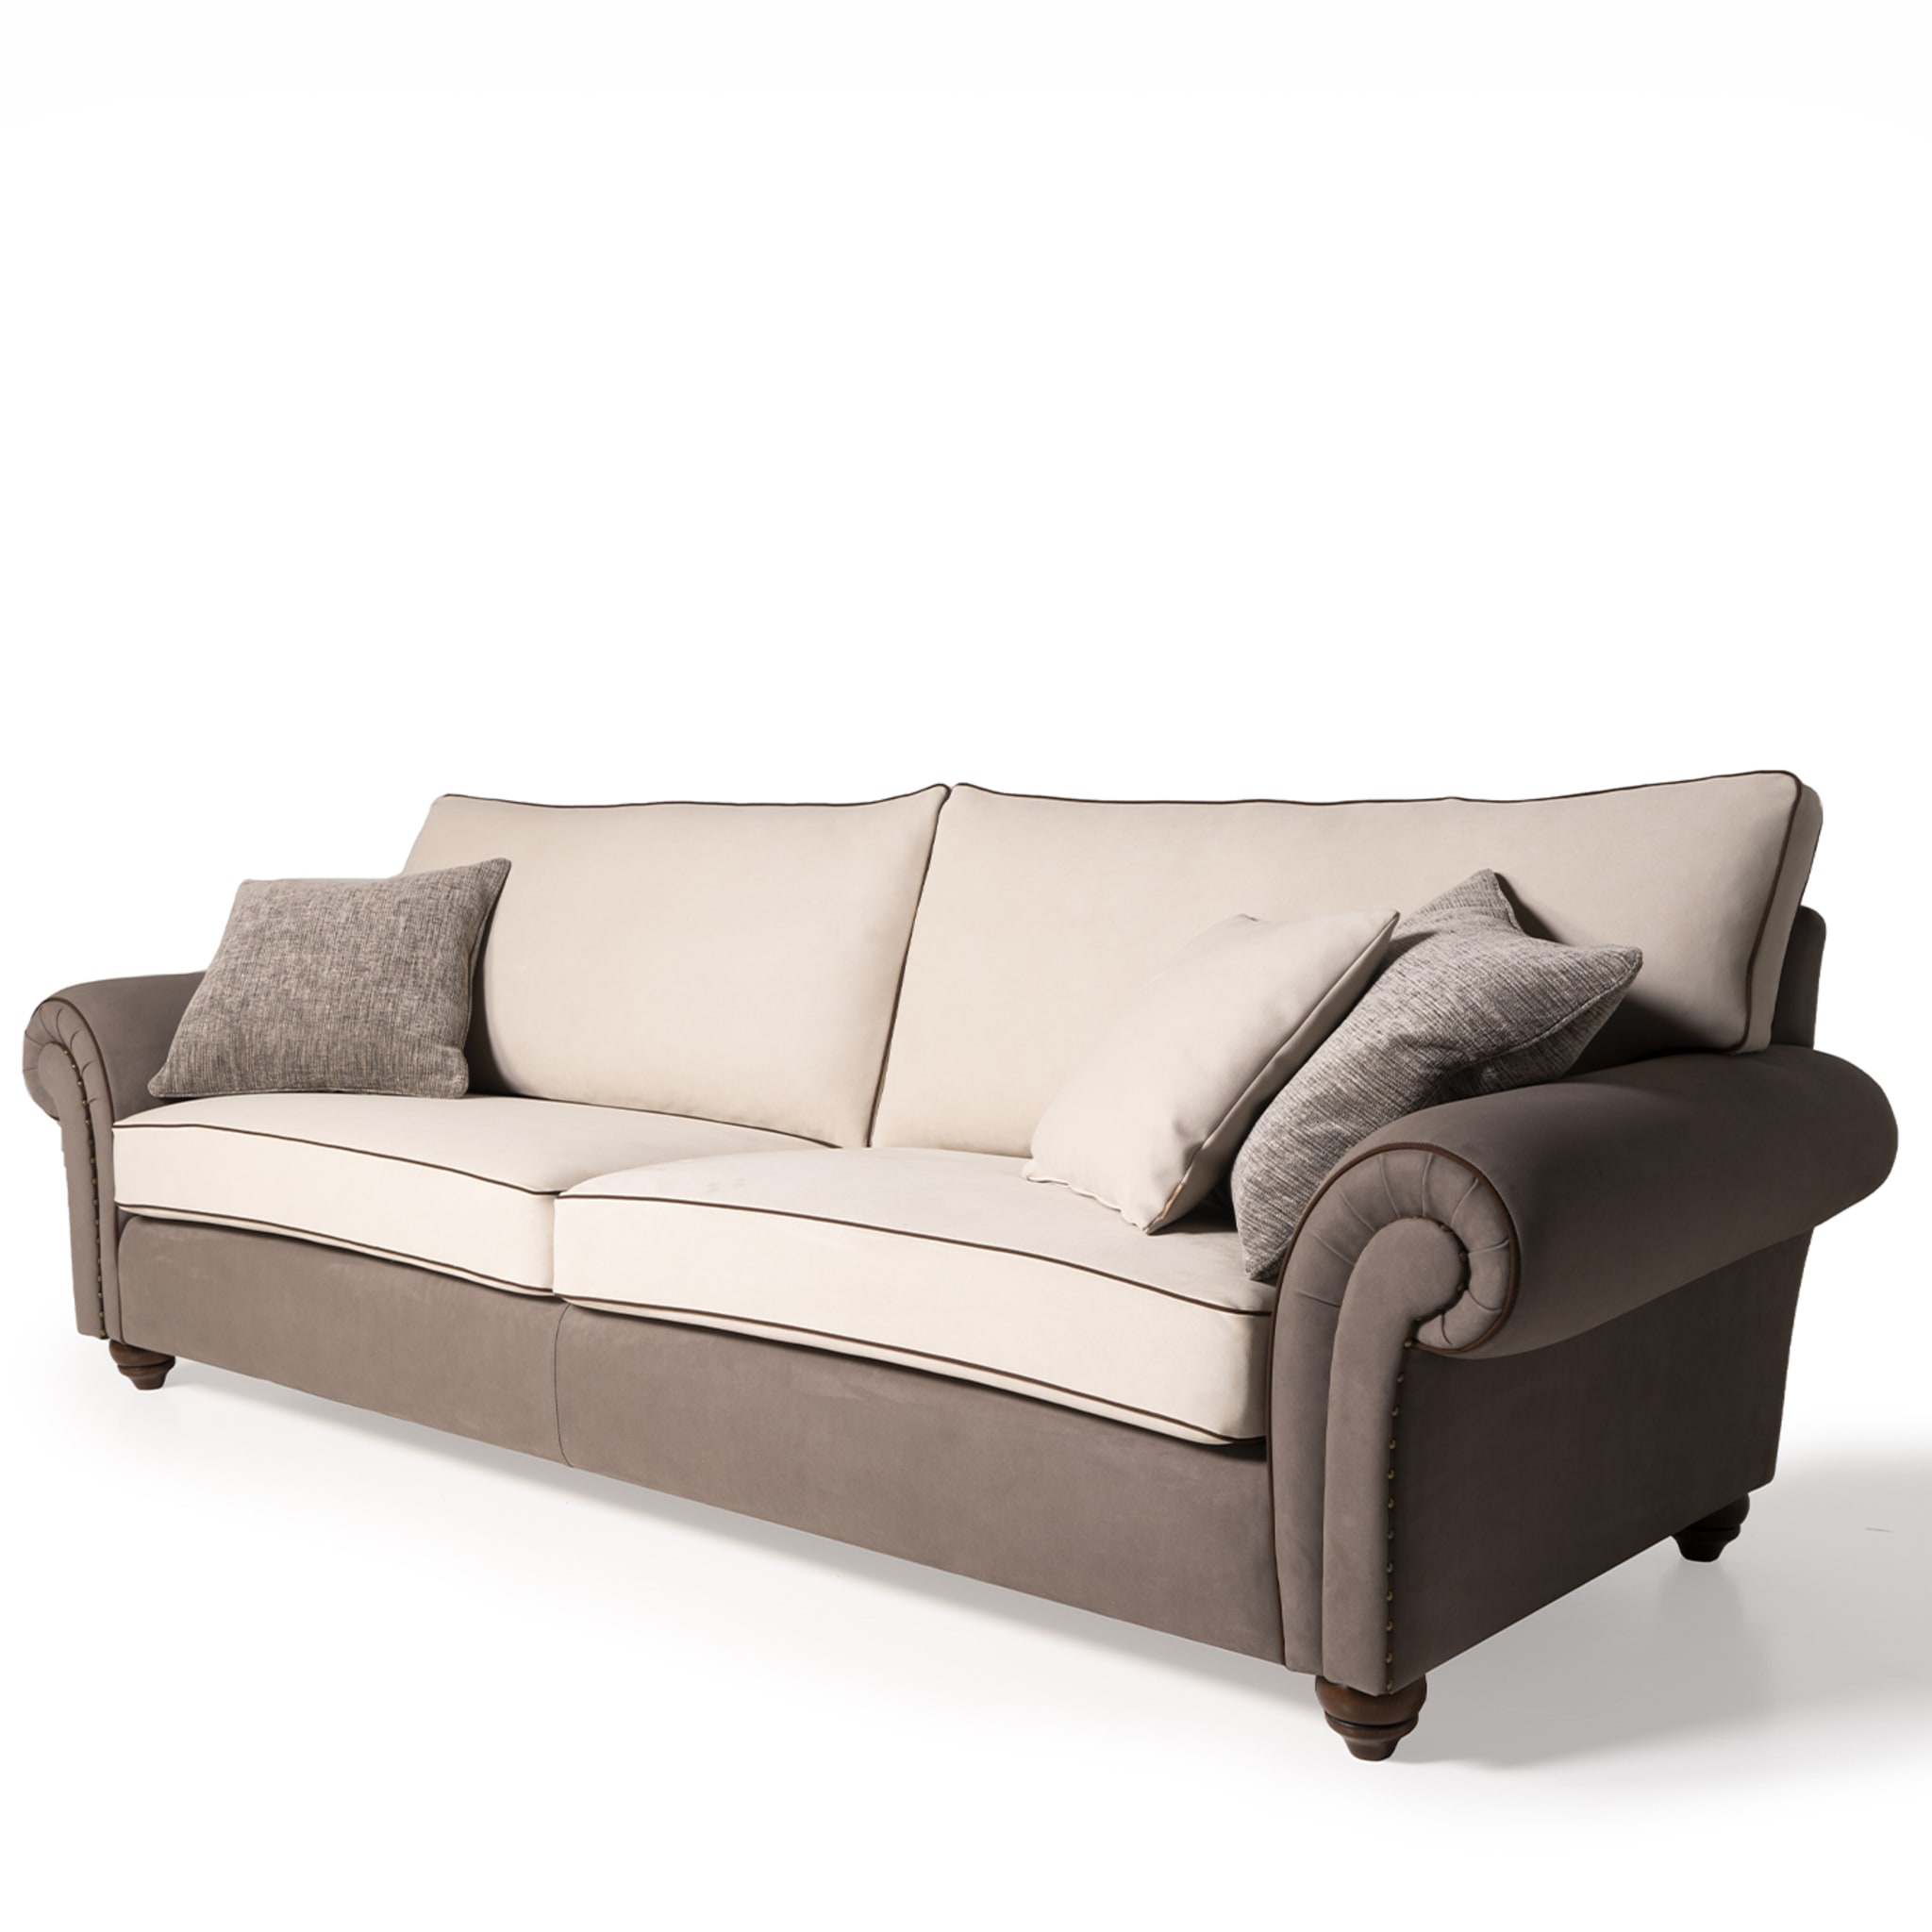 Borghese 3-Seater Sofa by Marco and Giulio Mantellassi - Alternative view 2